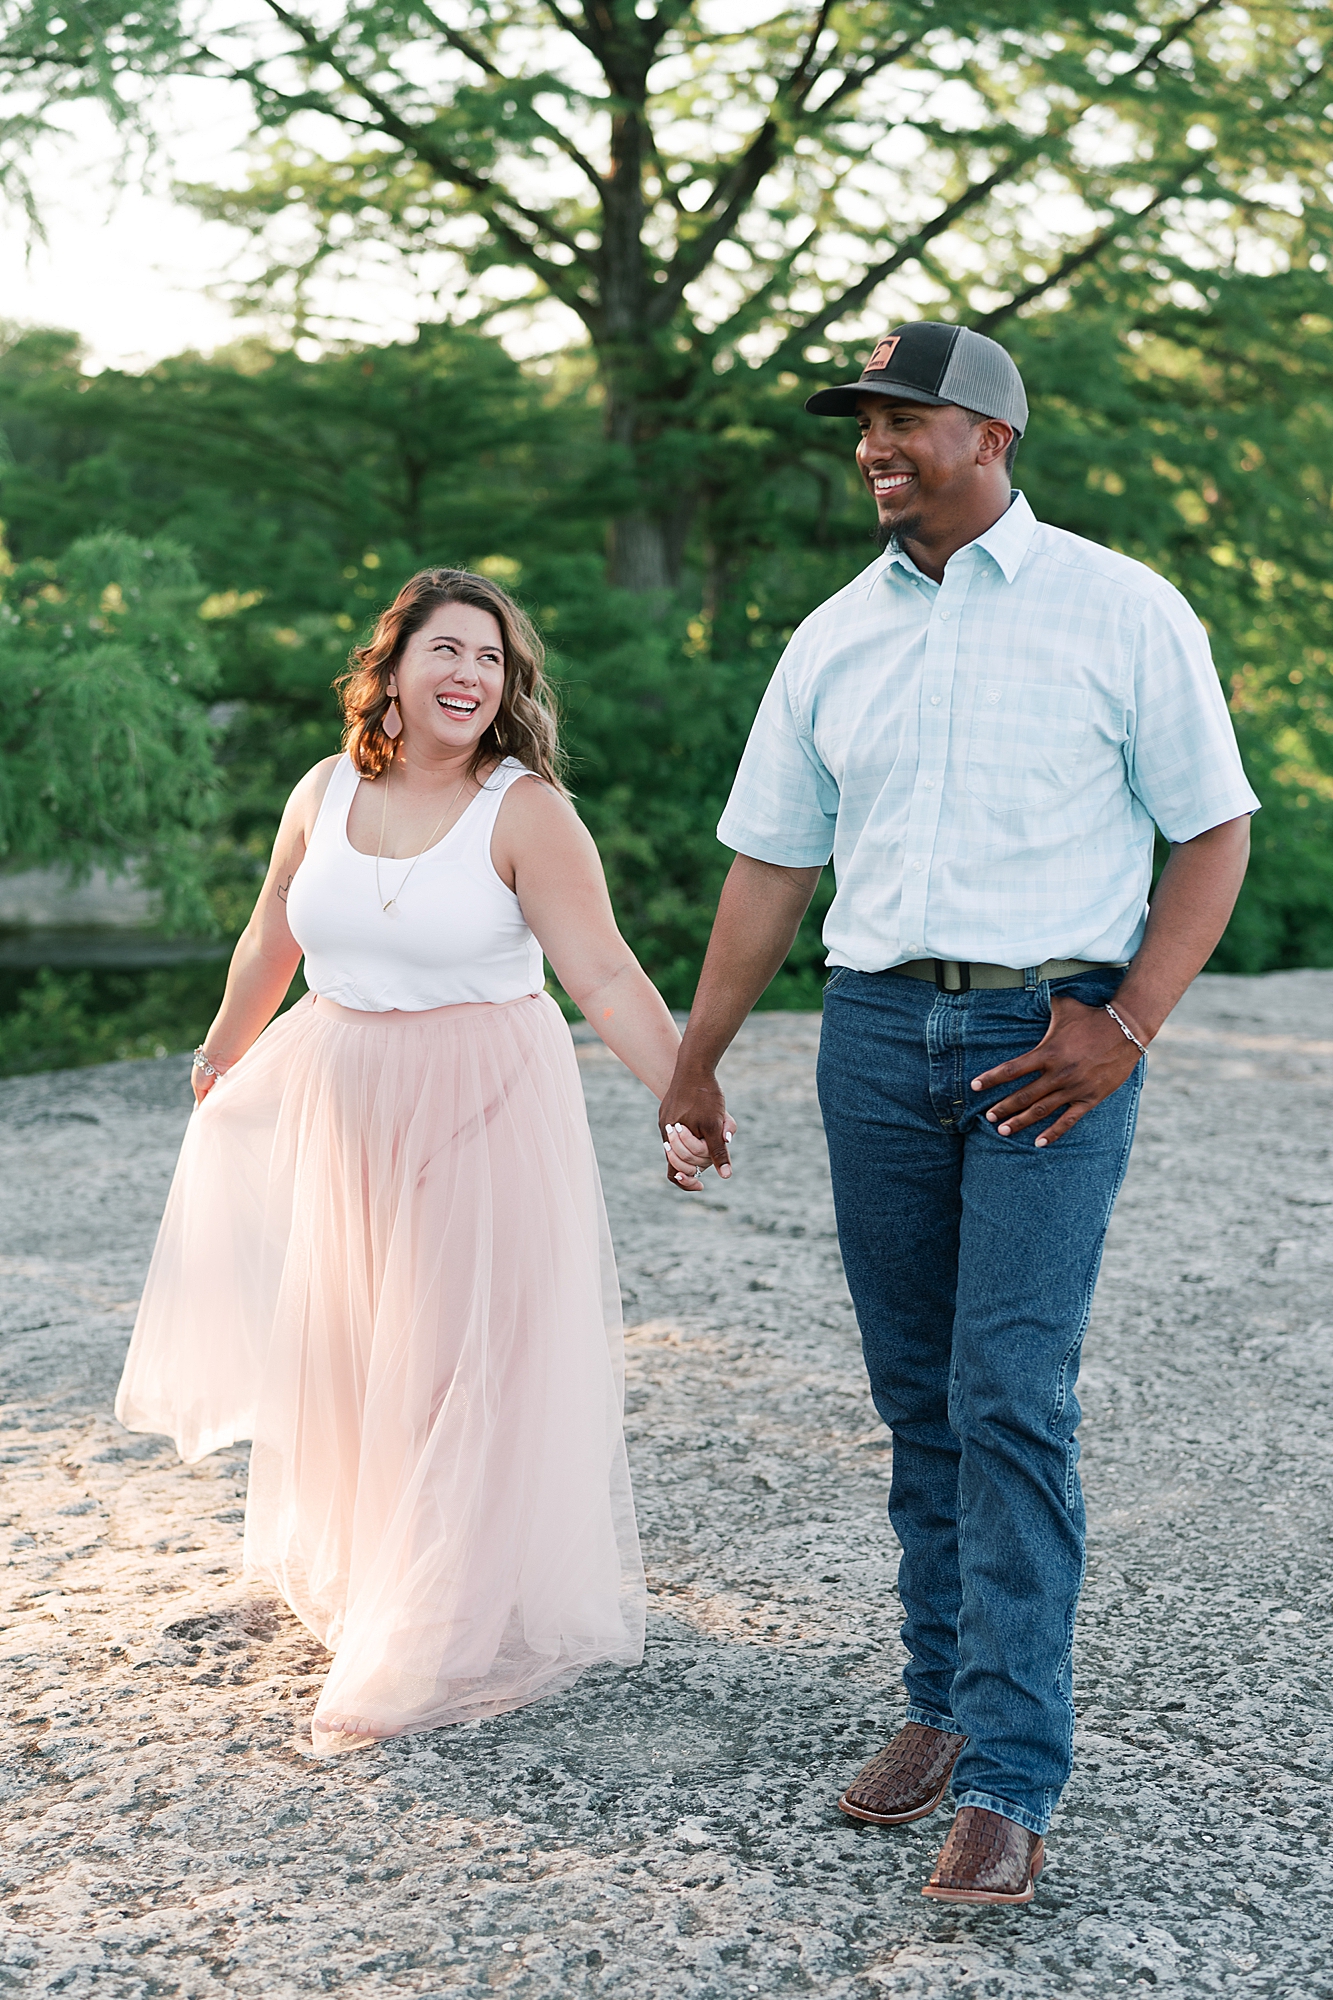 This beautiful bride to be DIY'd her own denim bridal jacket, to go with her flowy pink tulle skirt. This created the perfect outfit for her engagement session at McKinney Falls! Click through to see her outfit inspo and see how adorable she is with her fiance! #engagementsession #atxengagementsession #engagementsessionlocations #engagementsessionoutfit